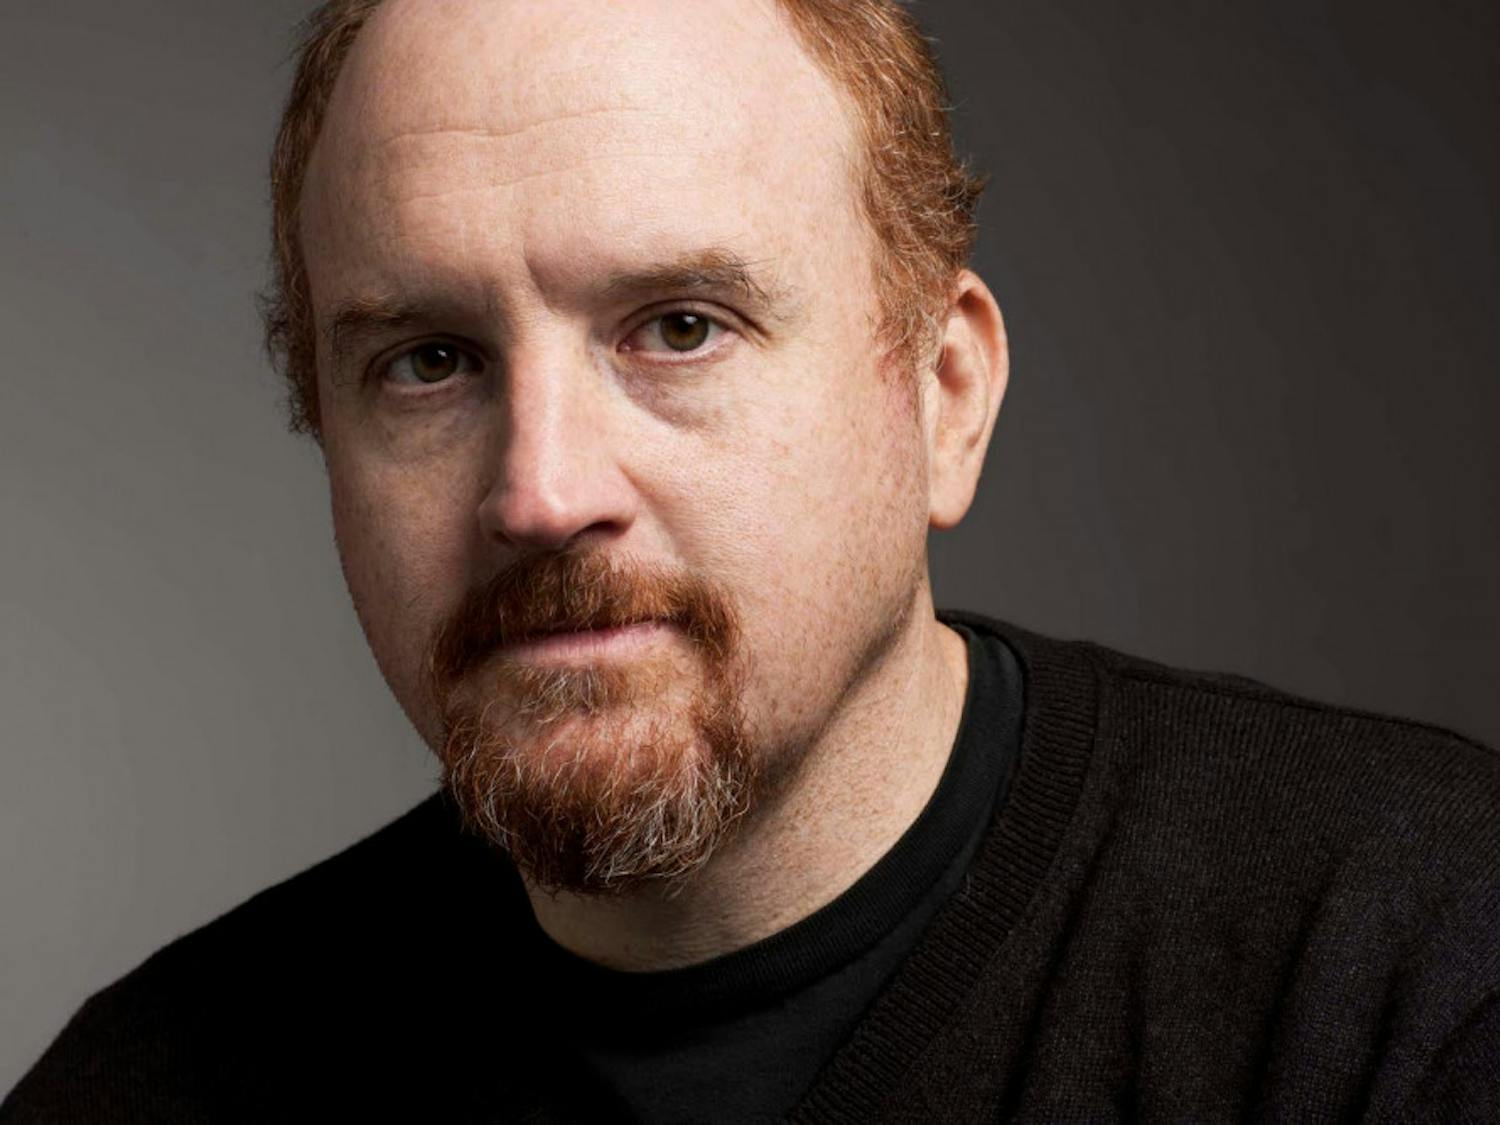 All joking aside, Louis C.K. has donated a large portion of his
profits to charity.